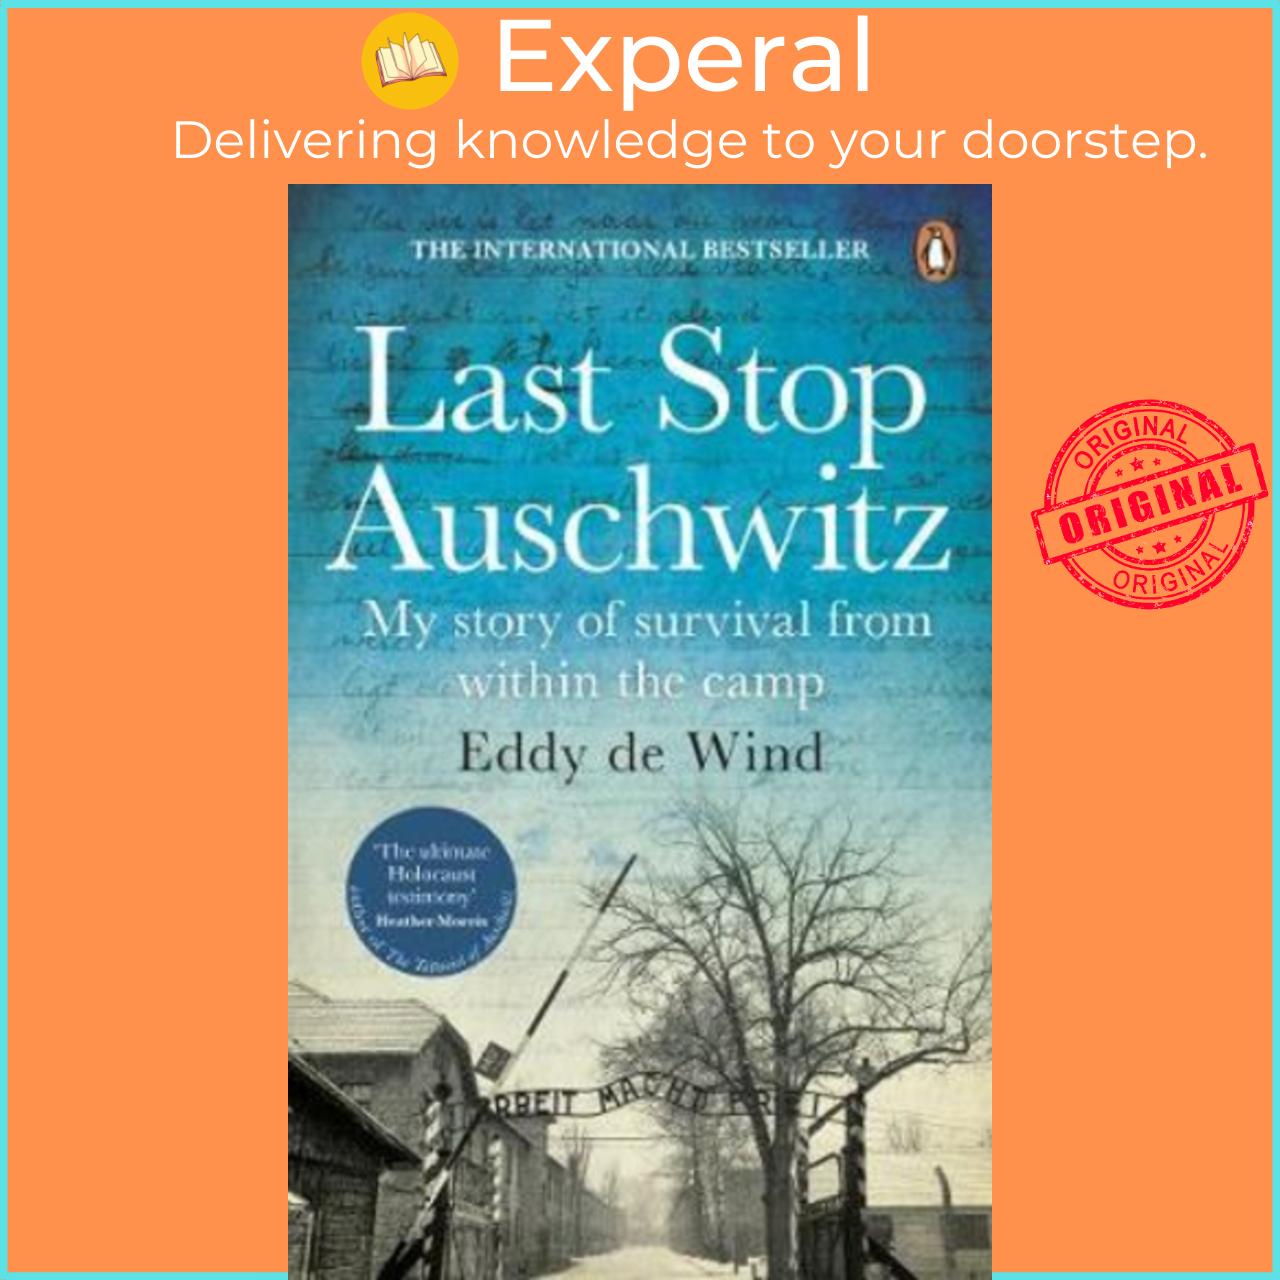 Sách - Last Stop Auschwitz : My story of survival from within the camp by Eddy de Wind (UK edition, paperback)